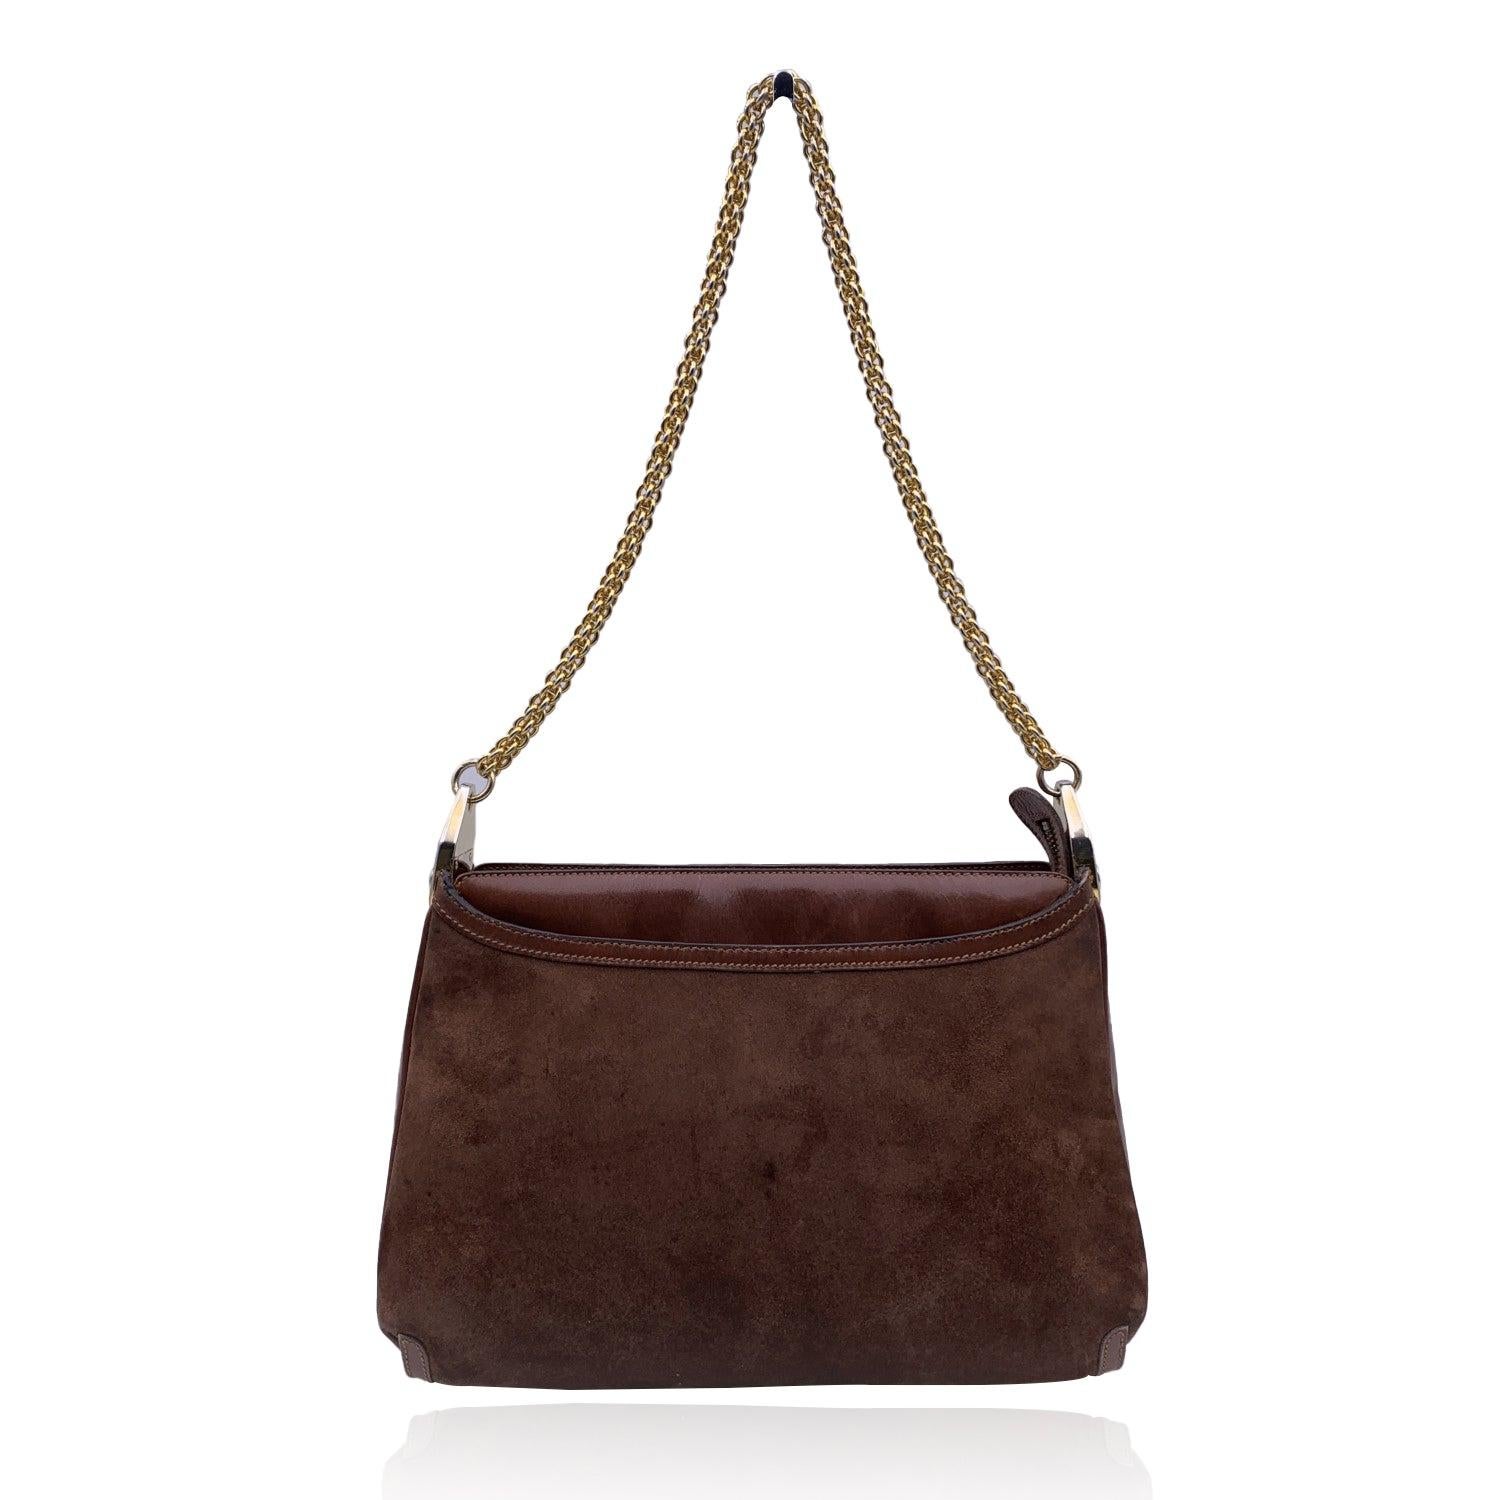 Gucci vintage shoulder bag. Brown suede and leather. Upper zipper closure. Gold metal chain strap. Brown leather lining. 1 middle zip section and 2 exterior open pockets. Brown leather lining. 1 side zip pocket inside. 'Made in Italy by Gucci'